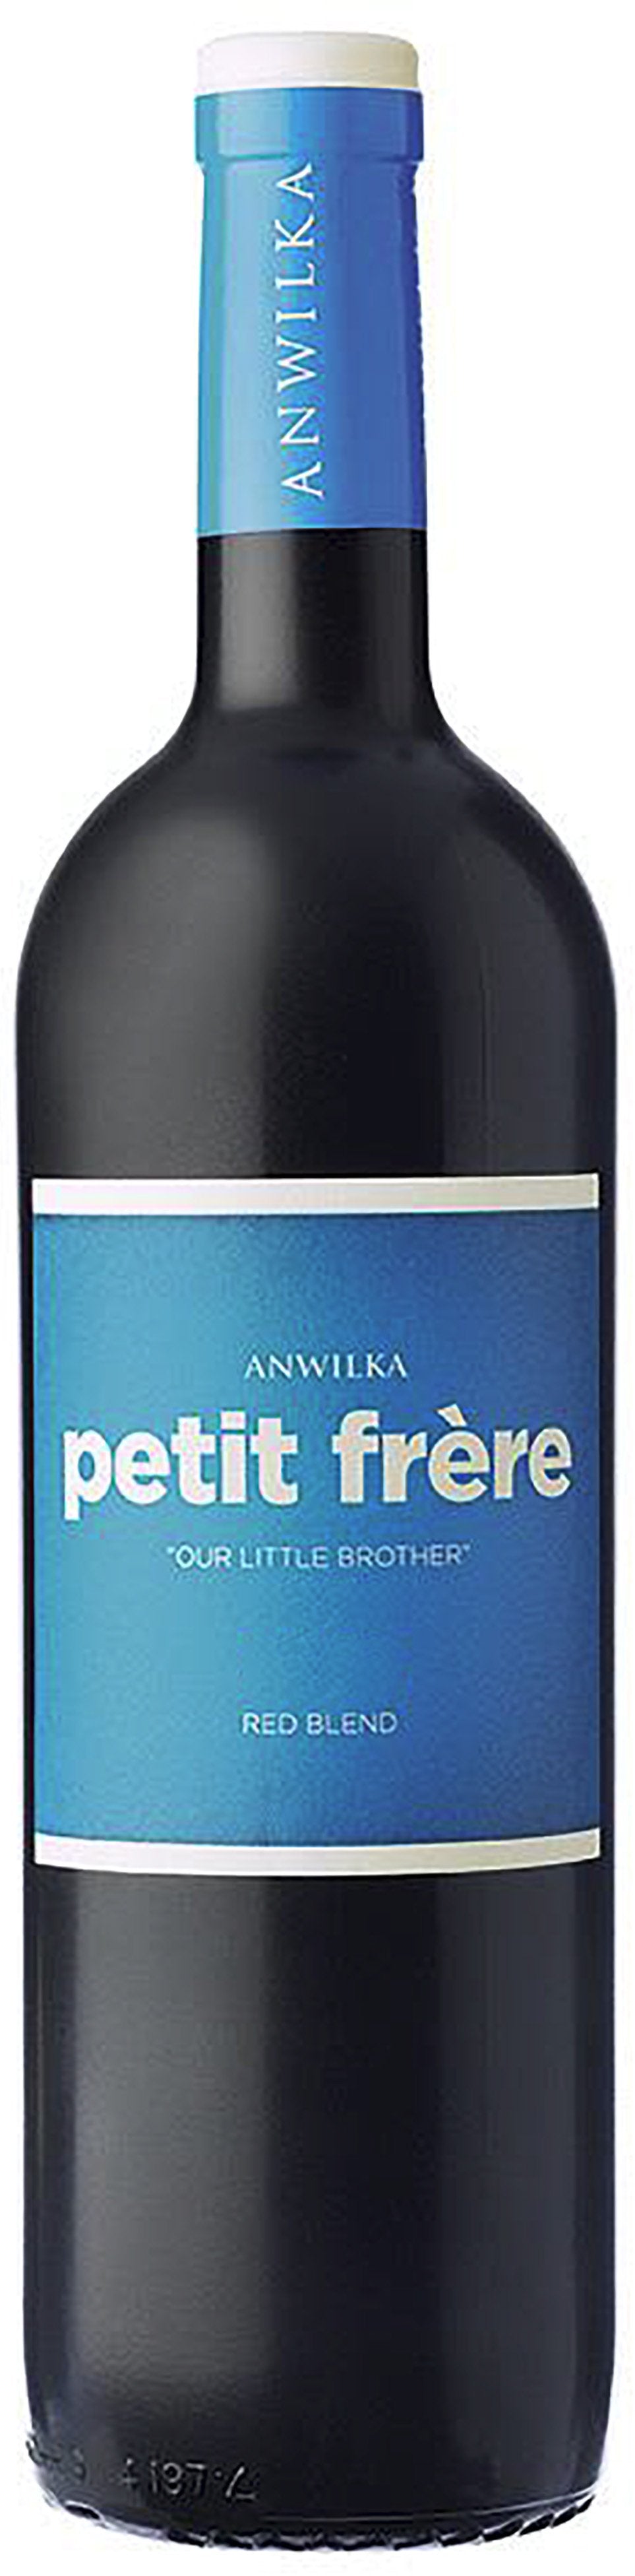 Anwilka Petit Frere Our Little Brother 2018